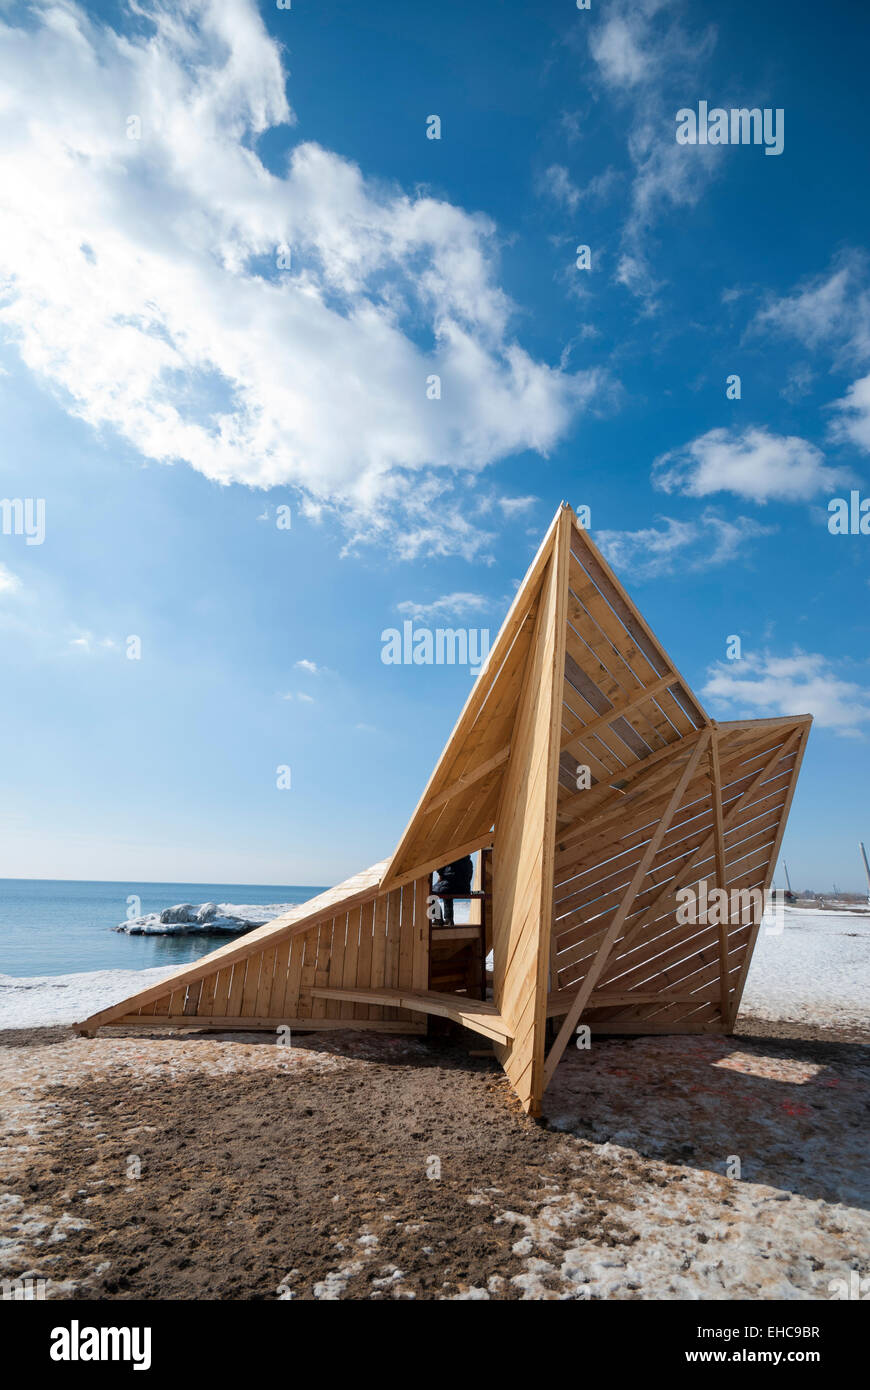 A temporary wooden warming hut one of five installations that are part of an outdoor winter beach art exhibit in Toronto Canada Stock Photo